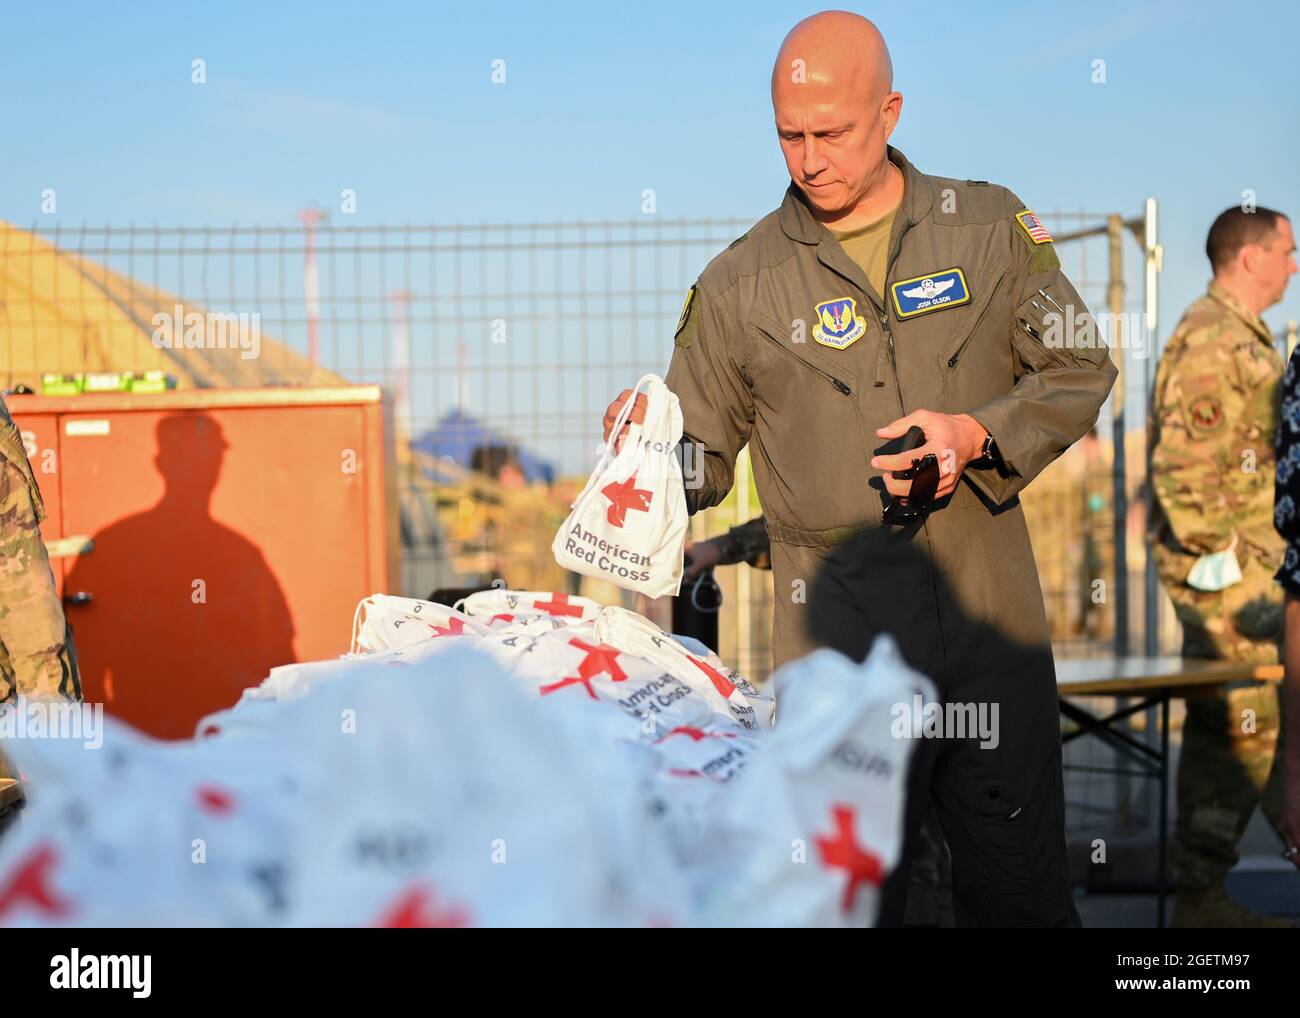 Ramstein Miesenbach, Germany. 20th Aug, 2021. U.S. Air Force Brig. Gen. Josh Olson, 86th Airlift Wing commander, inspects a Red Cross comfort kit for Afghan evacuees at Ramstein Air Base August 20, 2021 in Ramstein-Miesenbach, Germany. Ramstein Air Base is providing temporary lodging for evacuees from Afghanistan as part of Operation Allies Refuge. Credit: Planetpix/Alamy Live News Stock Photo